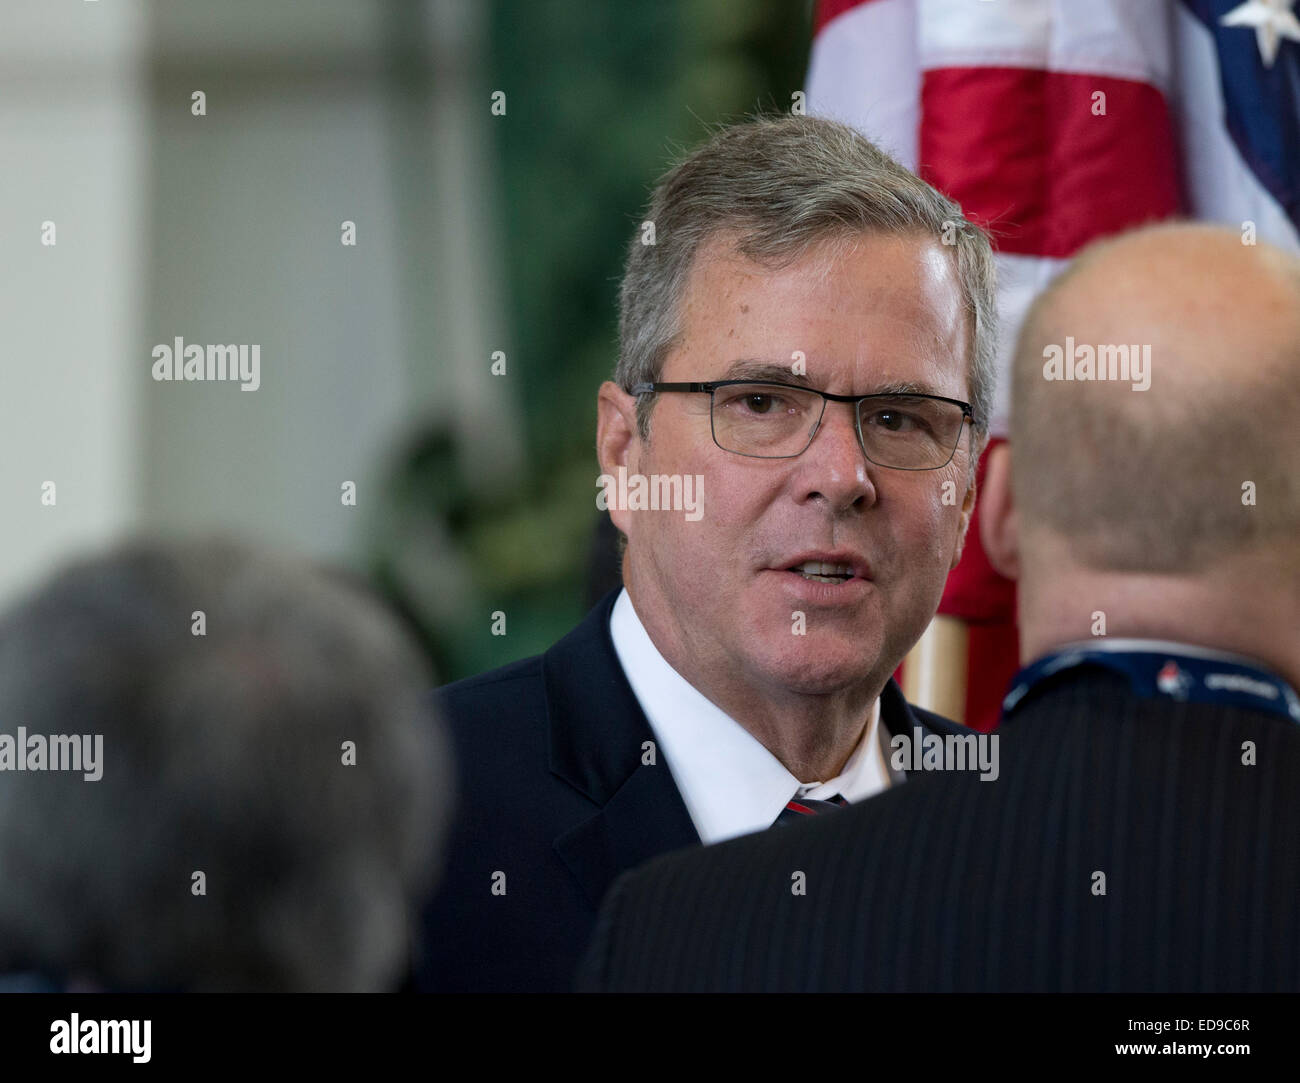 AFormer Florida Gov. Jeb Bush, who is considering a run for the Republican presidential nomination in 2016. Stock Photo